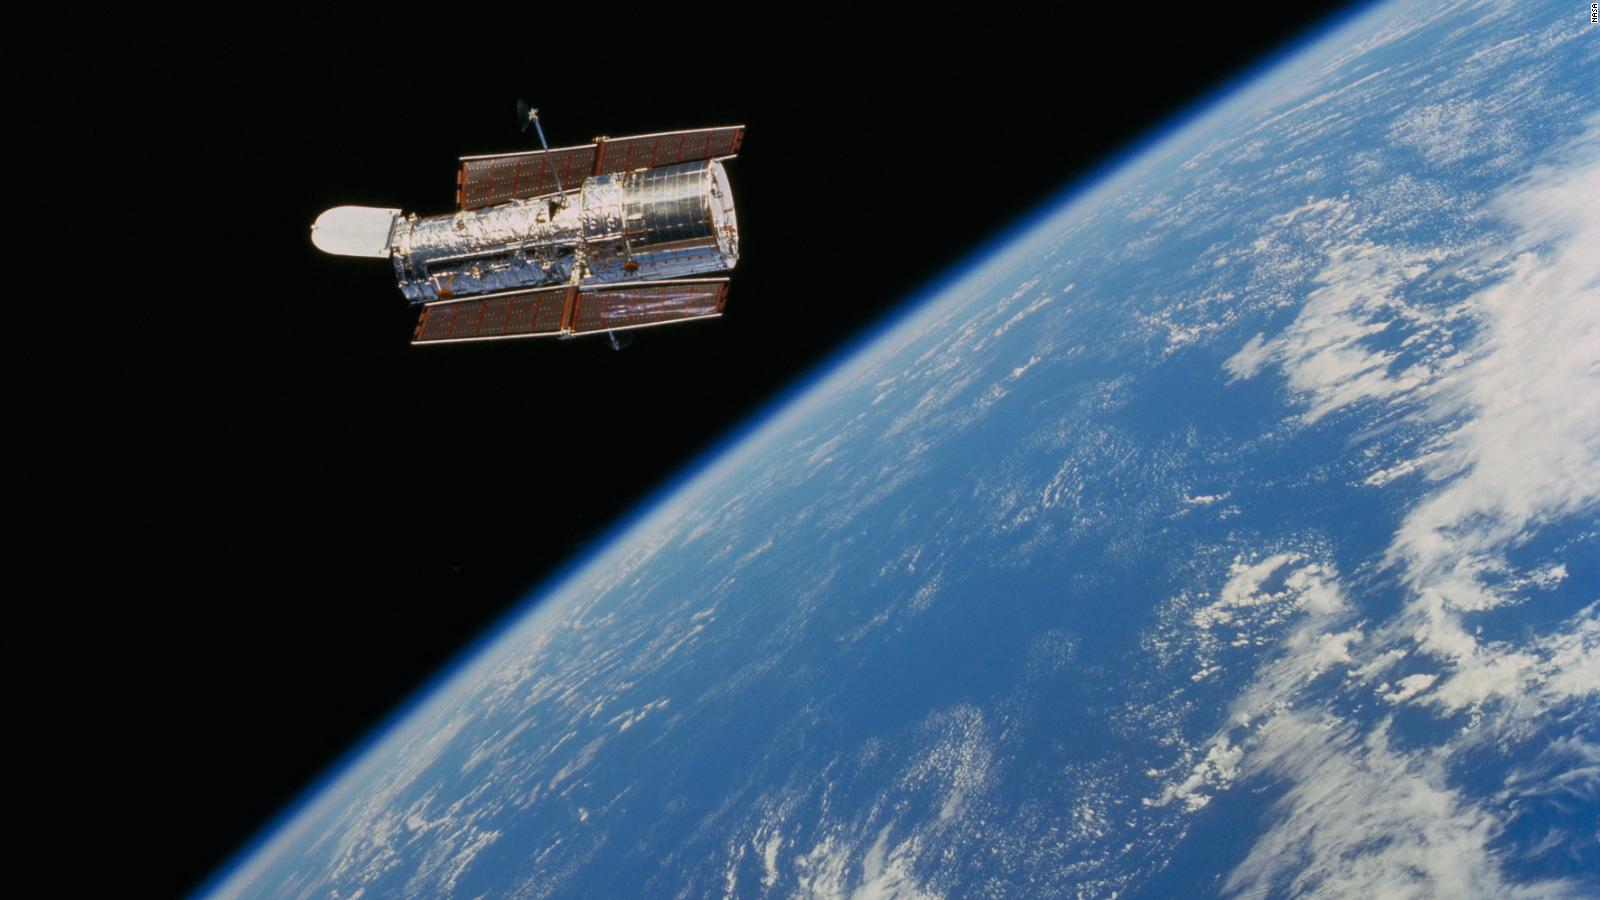 Hubble Space Telescope Celebrates Years Of Discoveries And Awe